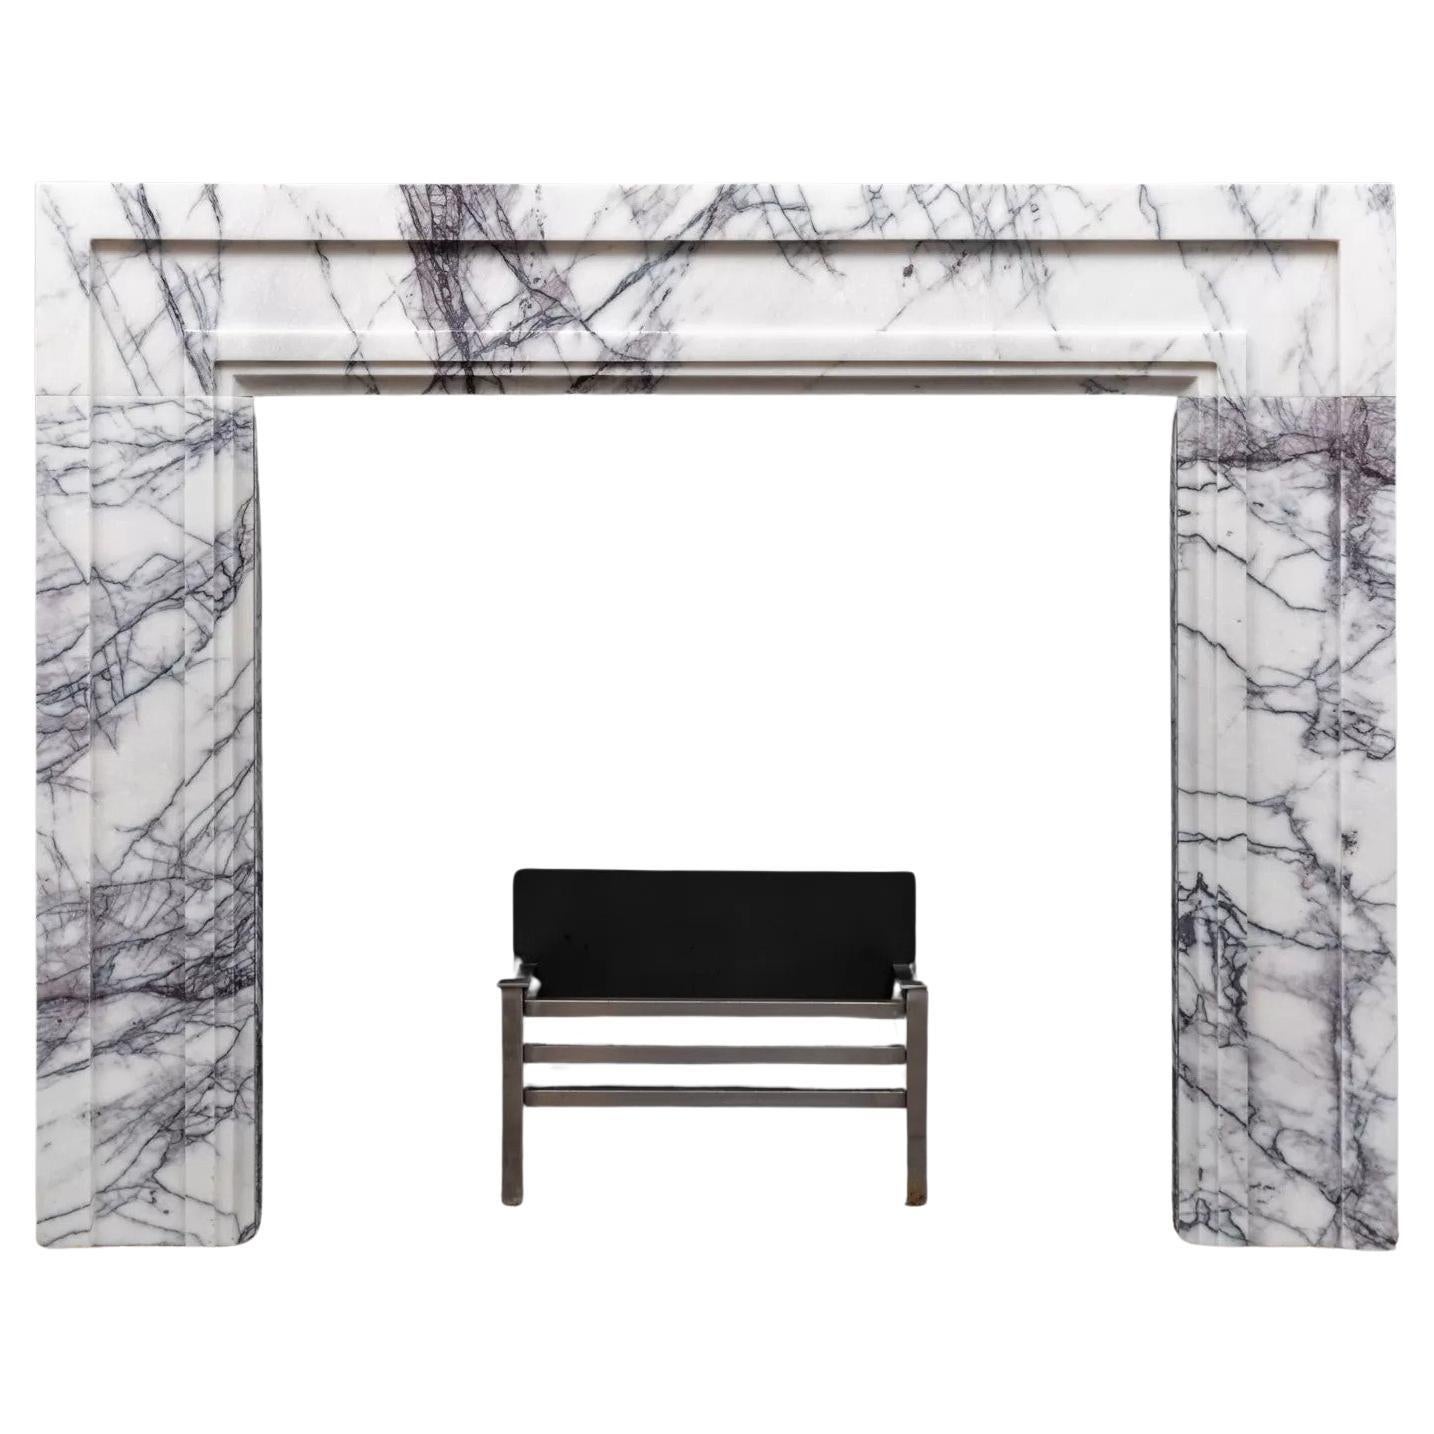 A modern styled lilac marble mantel made by Ryan & Smith